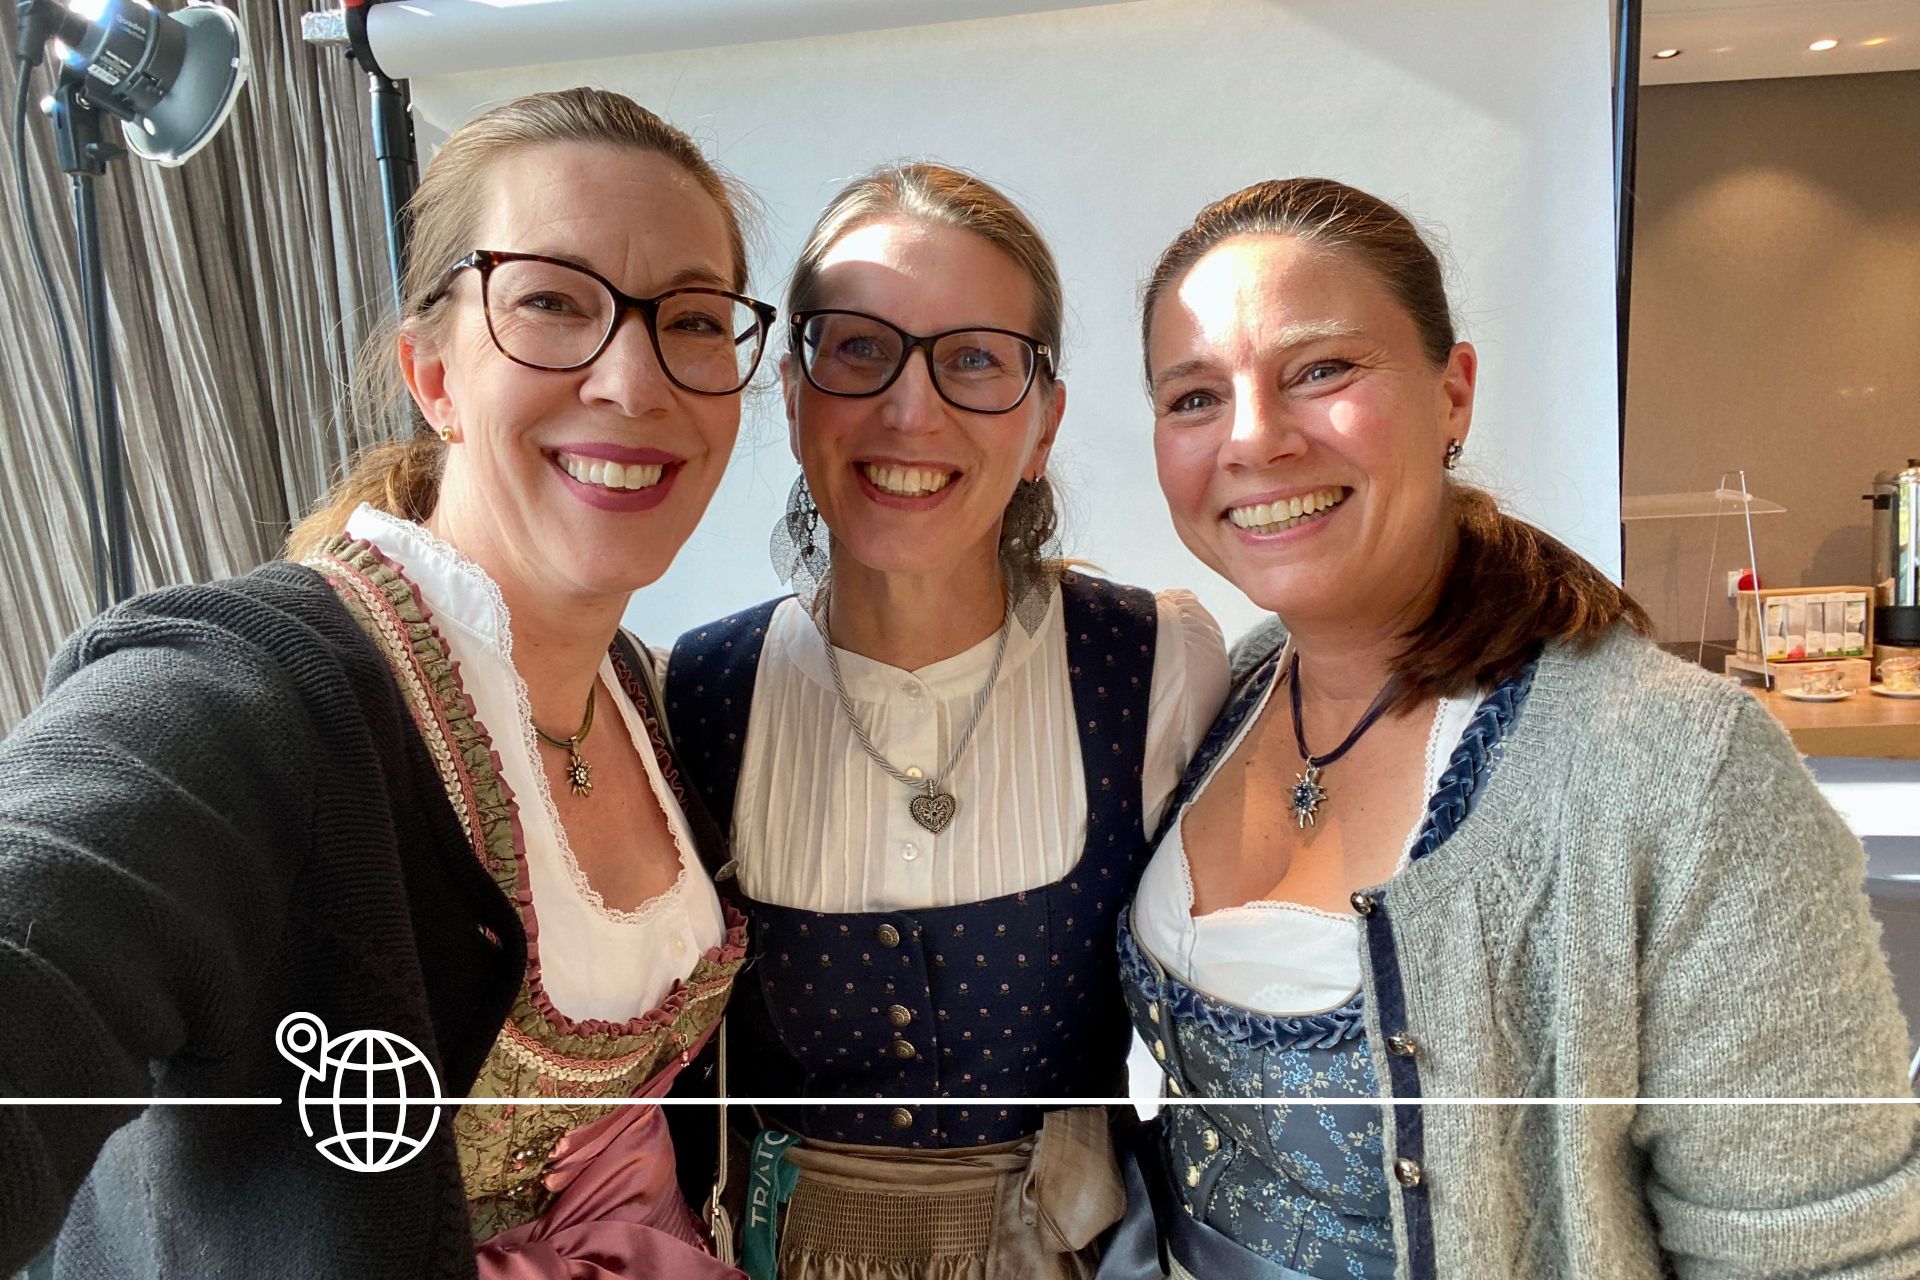 In a good mood, I am preparing for last year's Oktoberfest with my colleagues Marianne Ekstedt (centre) from TRATON AB and Kerstin de Vaan from TRATON SE. Of course, we are wearing a dirndl, the typical Bavarian traditional dress.